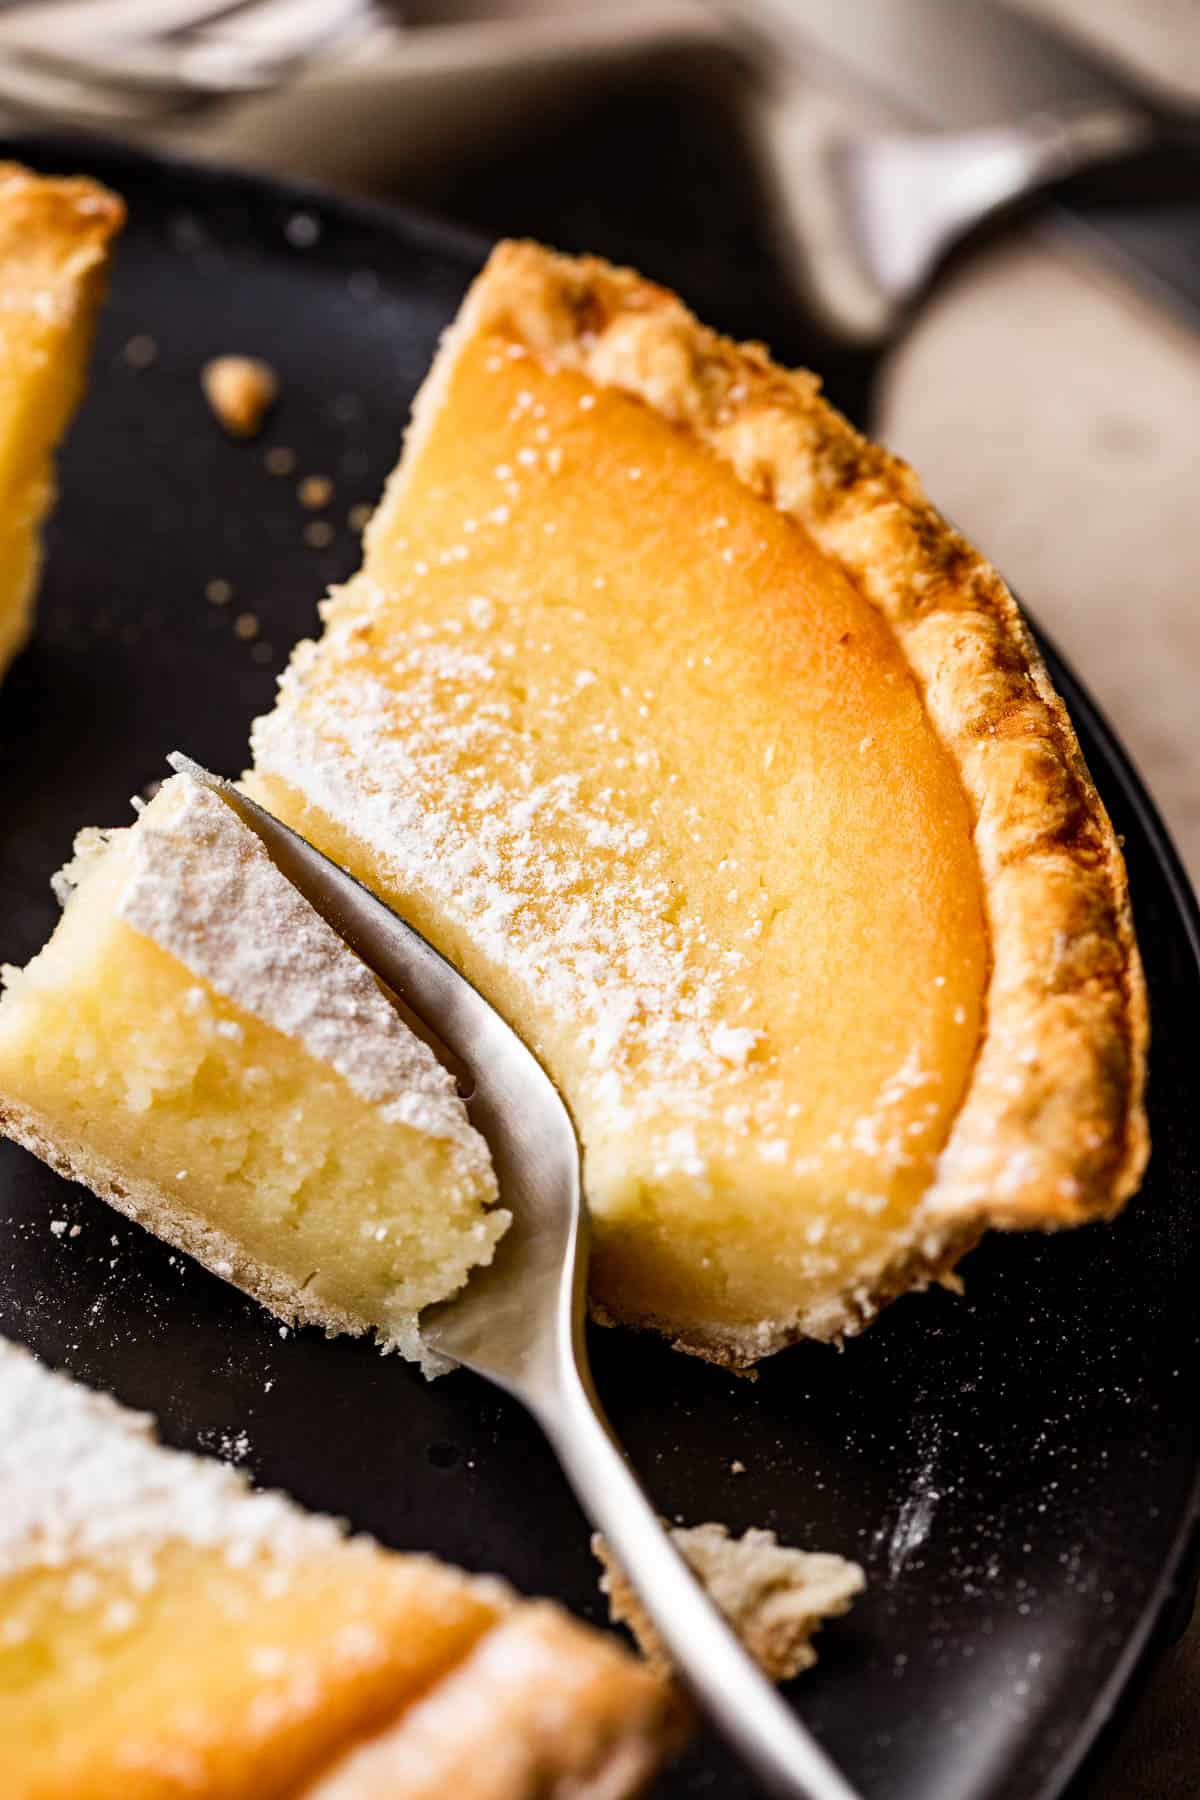 A slice of buttermilk pie on an earthenware saucer with a small dessert fork.